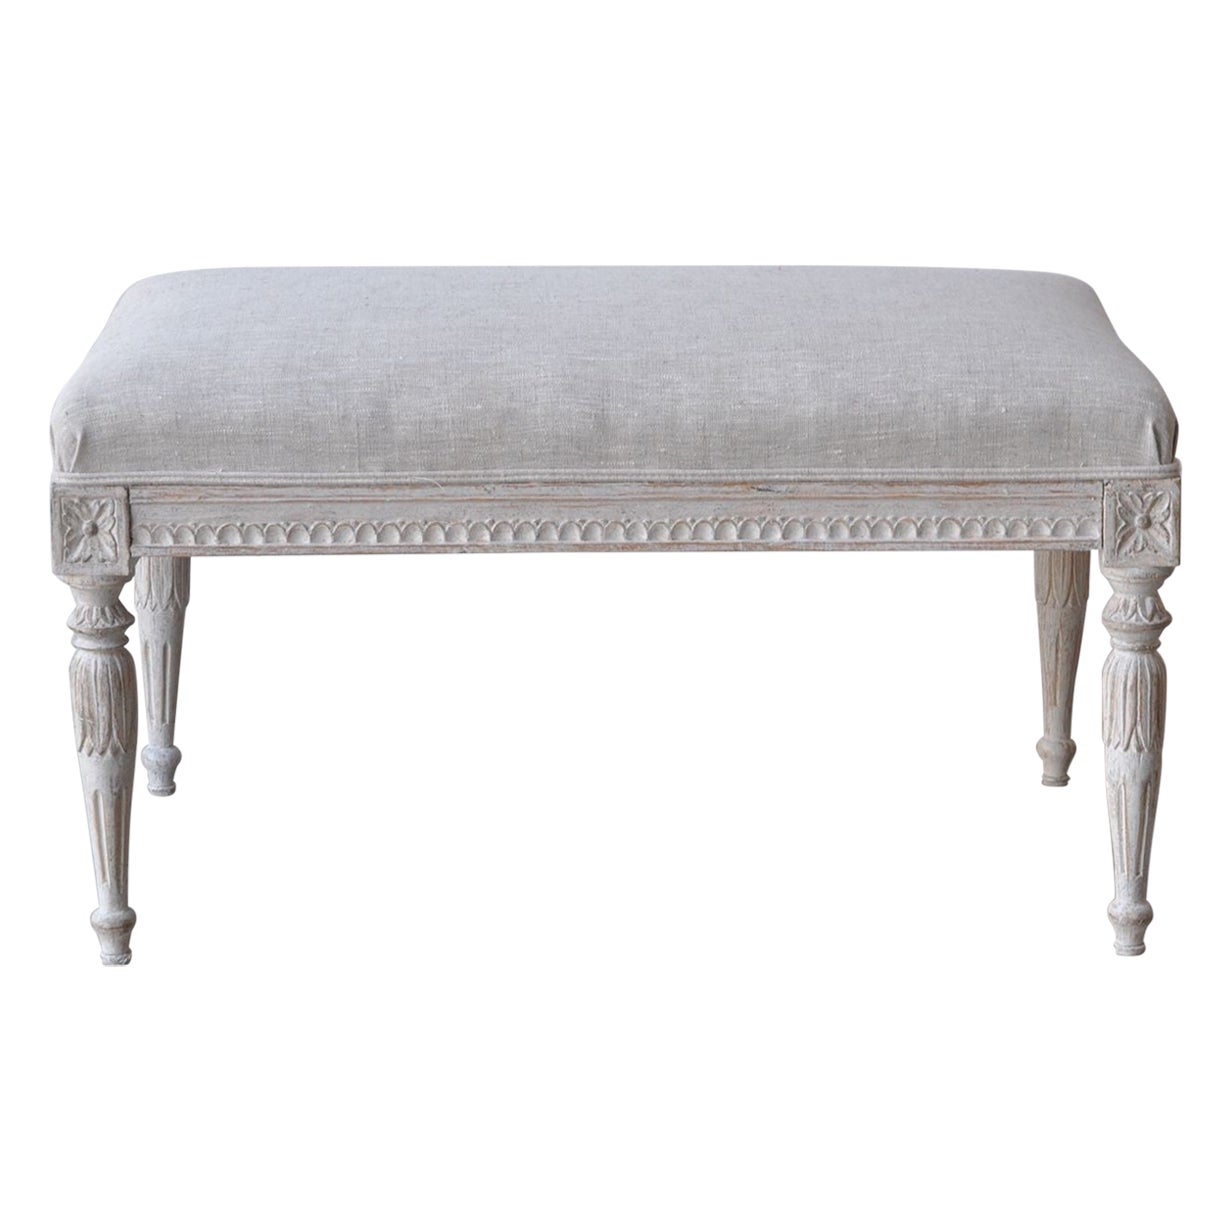 18th Century Swedish Gustavian Period Painted Footstool or Bench